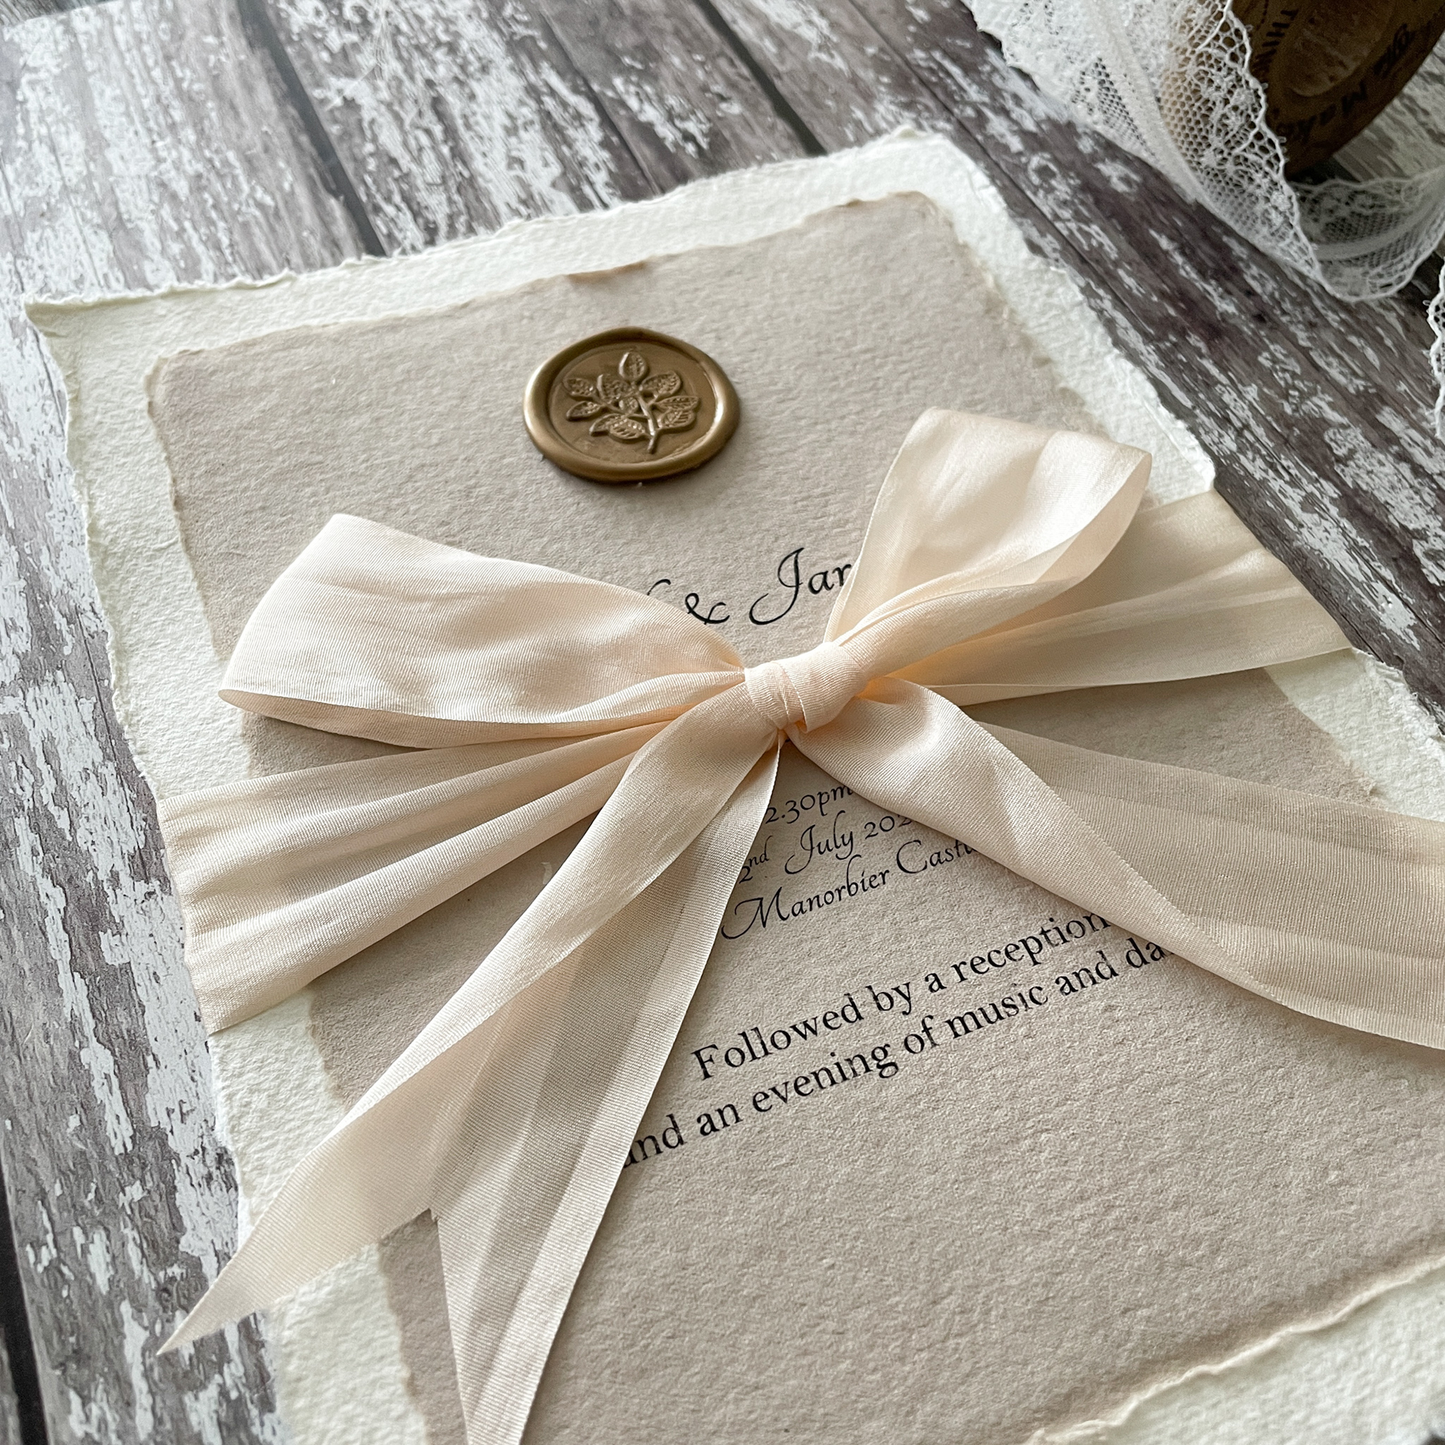 Wedding Invitation made with handmade recycled paper, silk ribbon and a wax seal.  Eco friendly wedding invitation in natural materials and colours.  Easy invitation to make at home.  By The Natural Paper Company